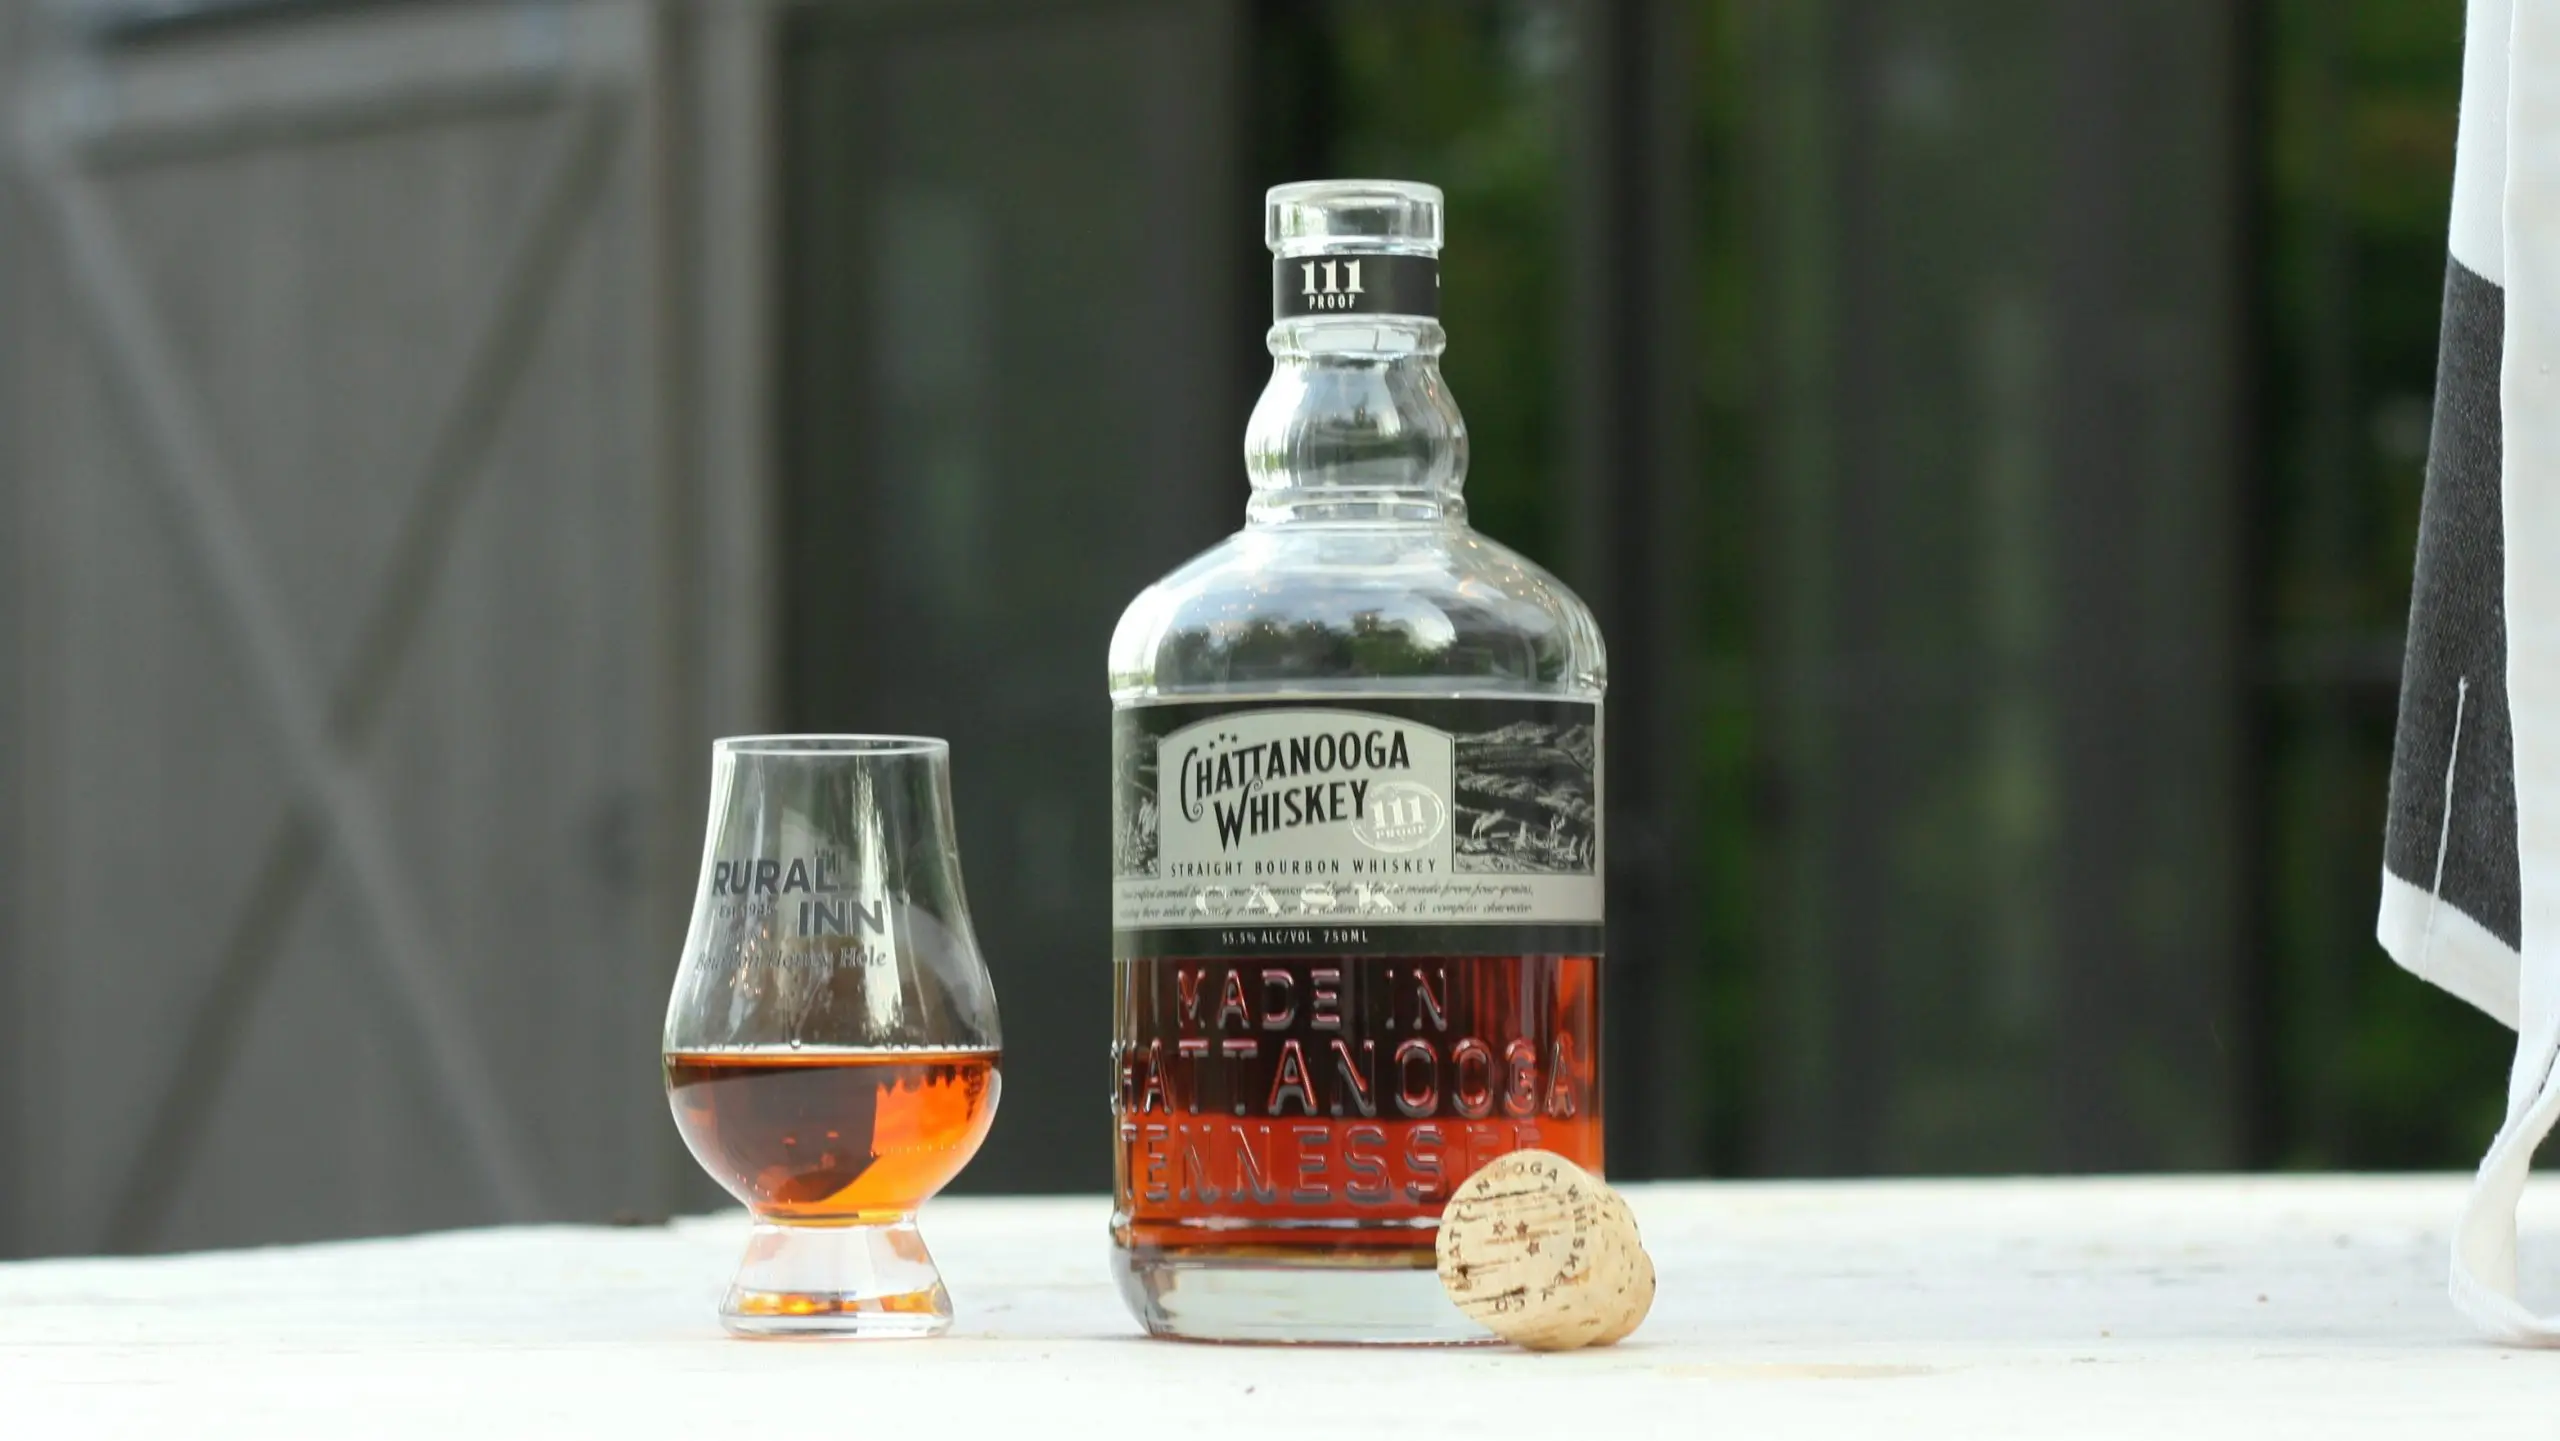 Chattanooga-Cask-strength